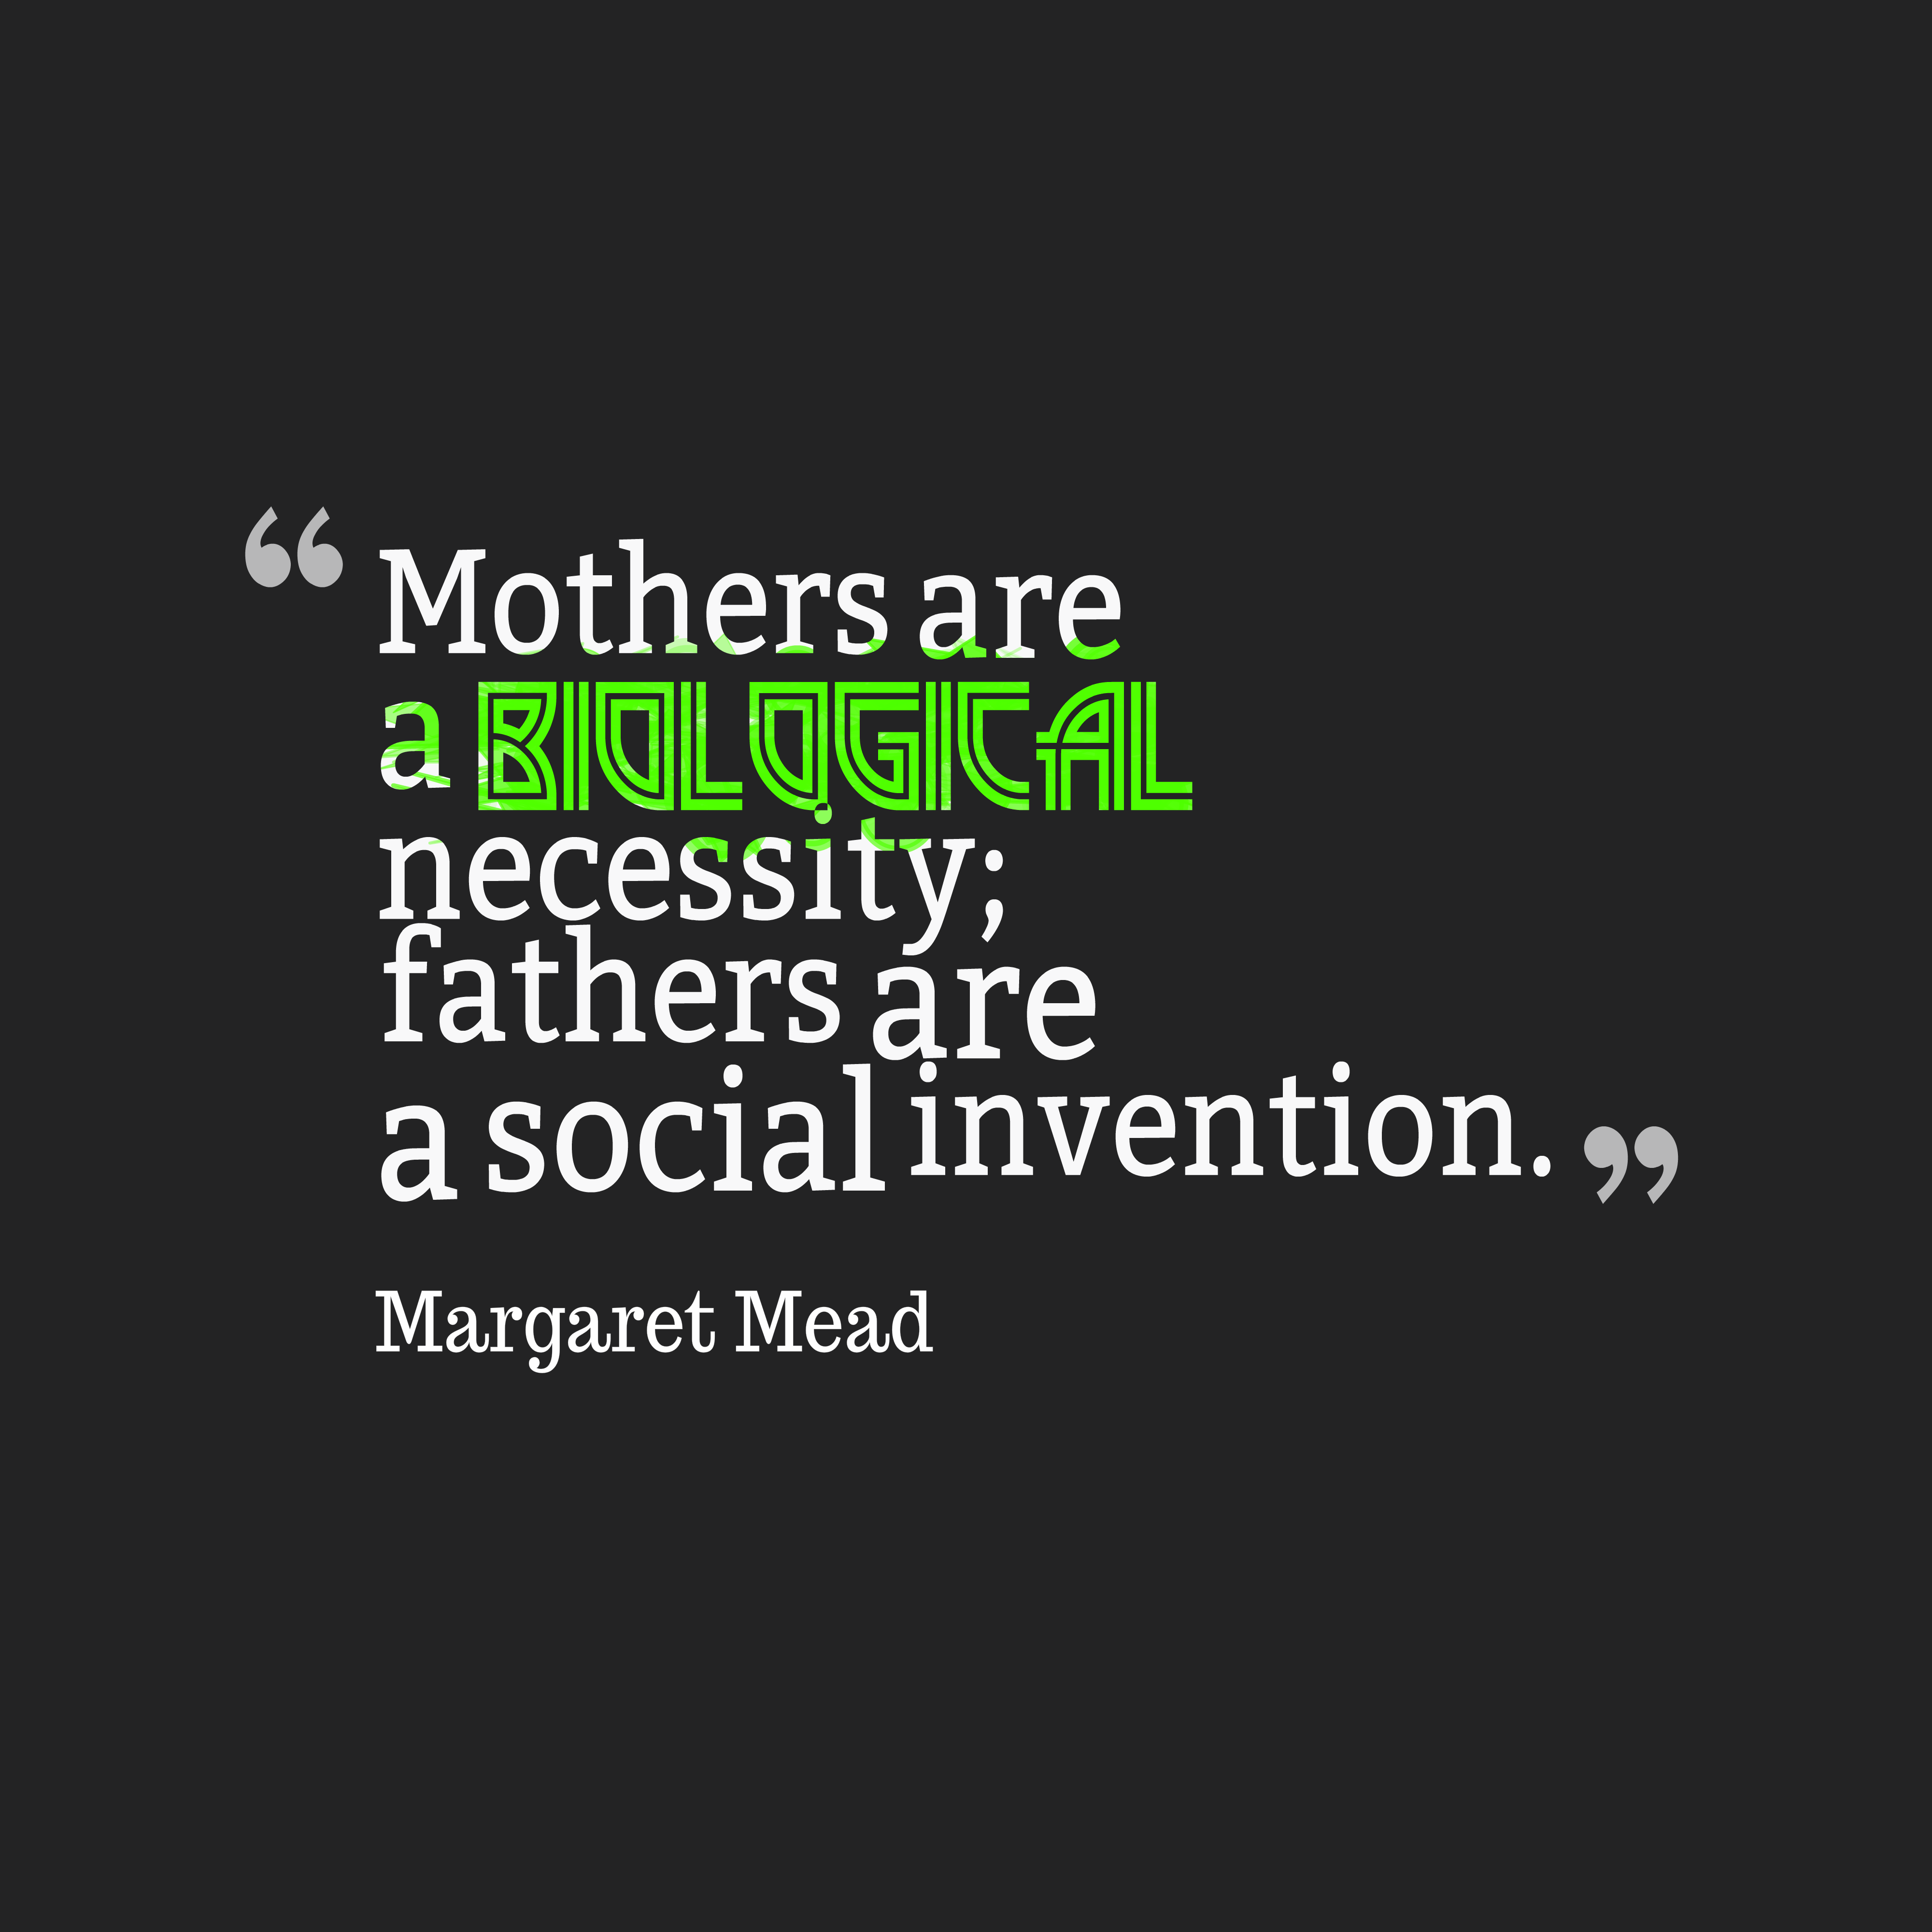 Mothers are a biological necessity; fathers are a social invention. Margaret Mead